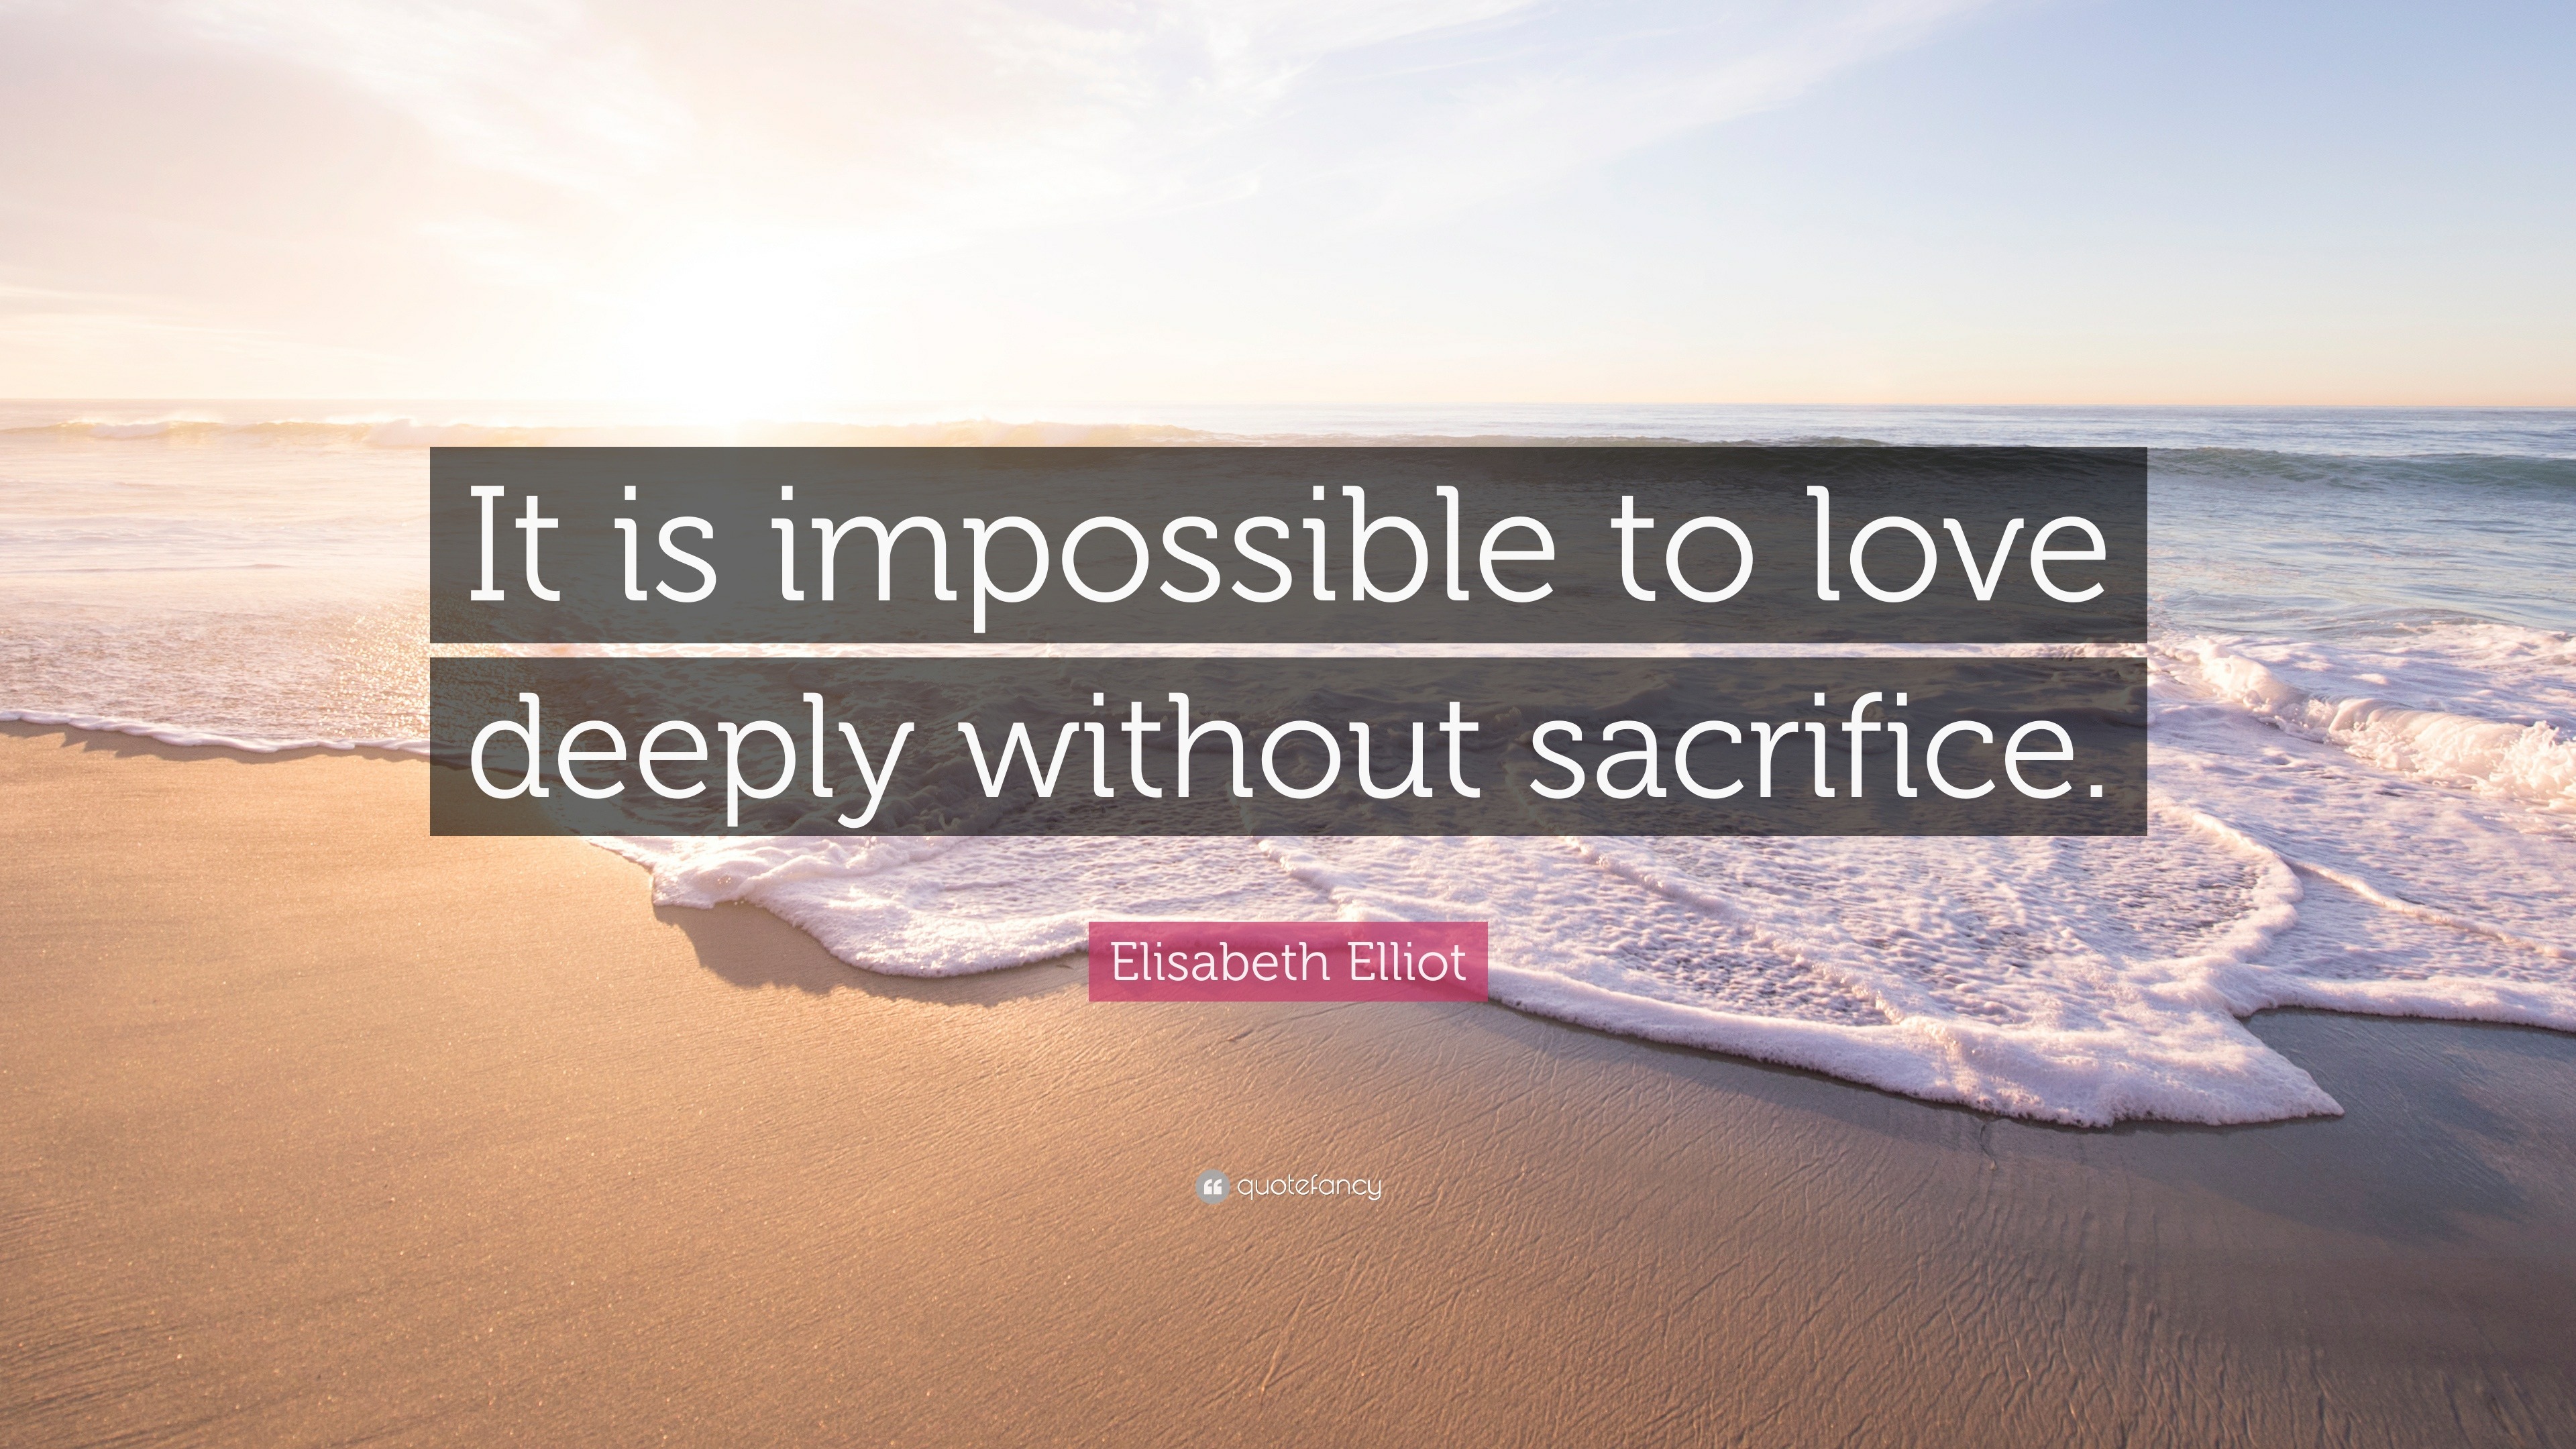 Elisabeth Elliot Quote “It is impossible to love deeply without sacrifice ”